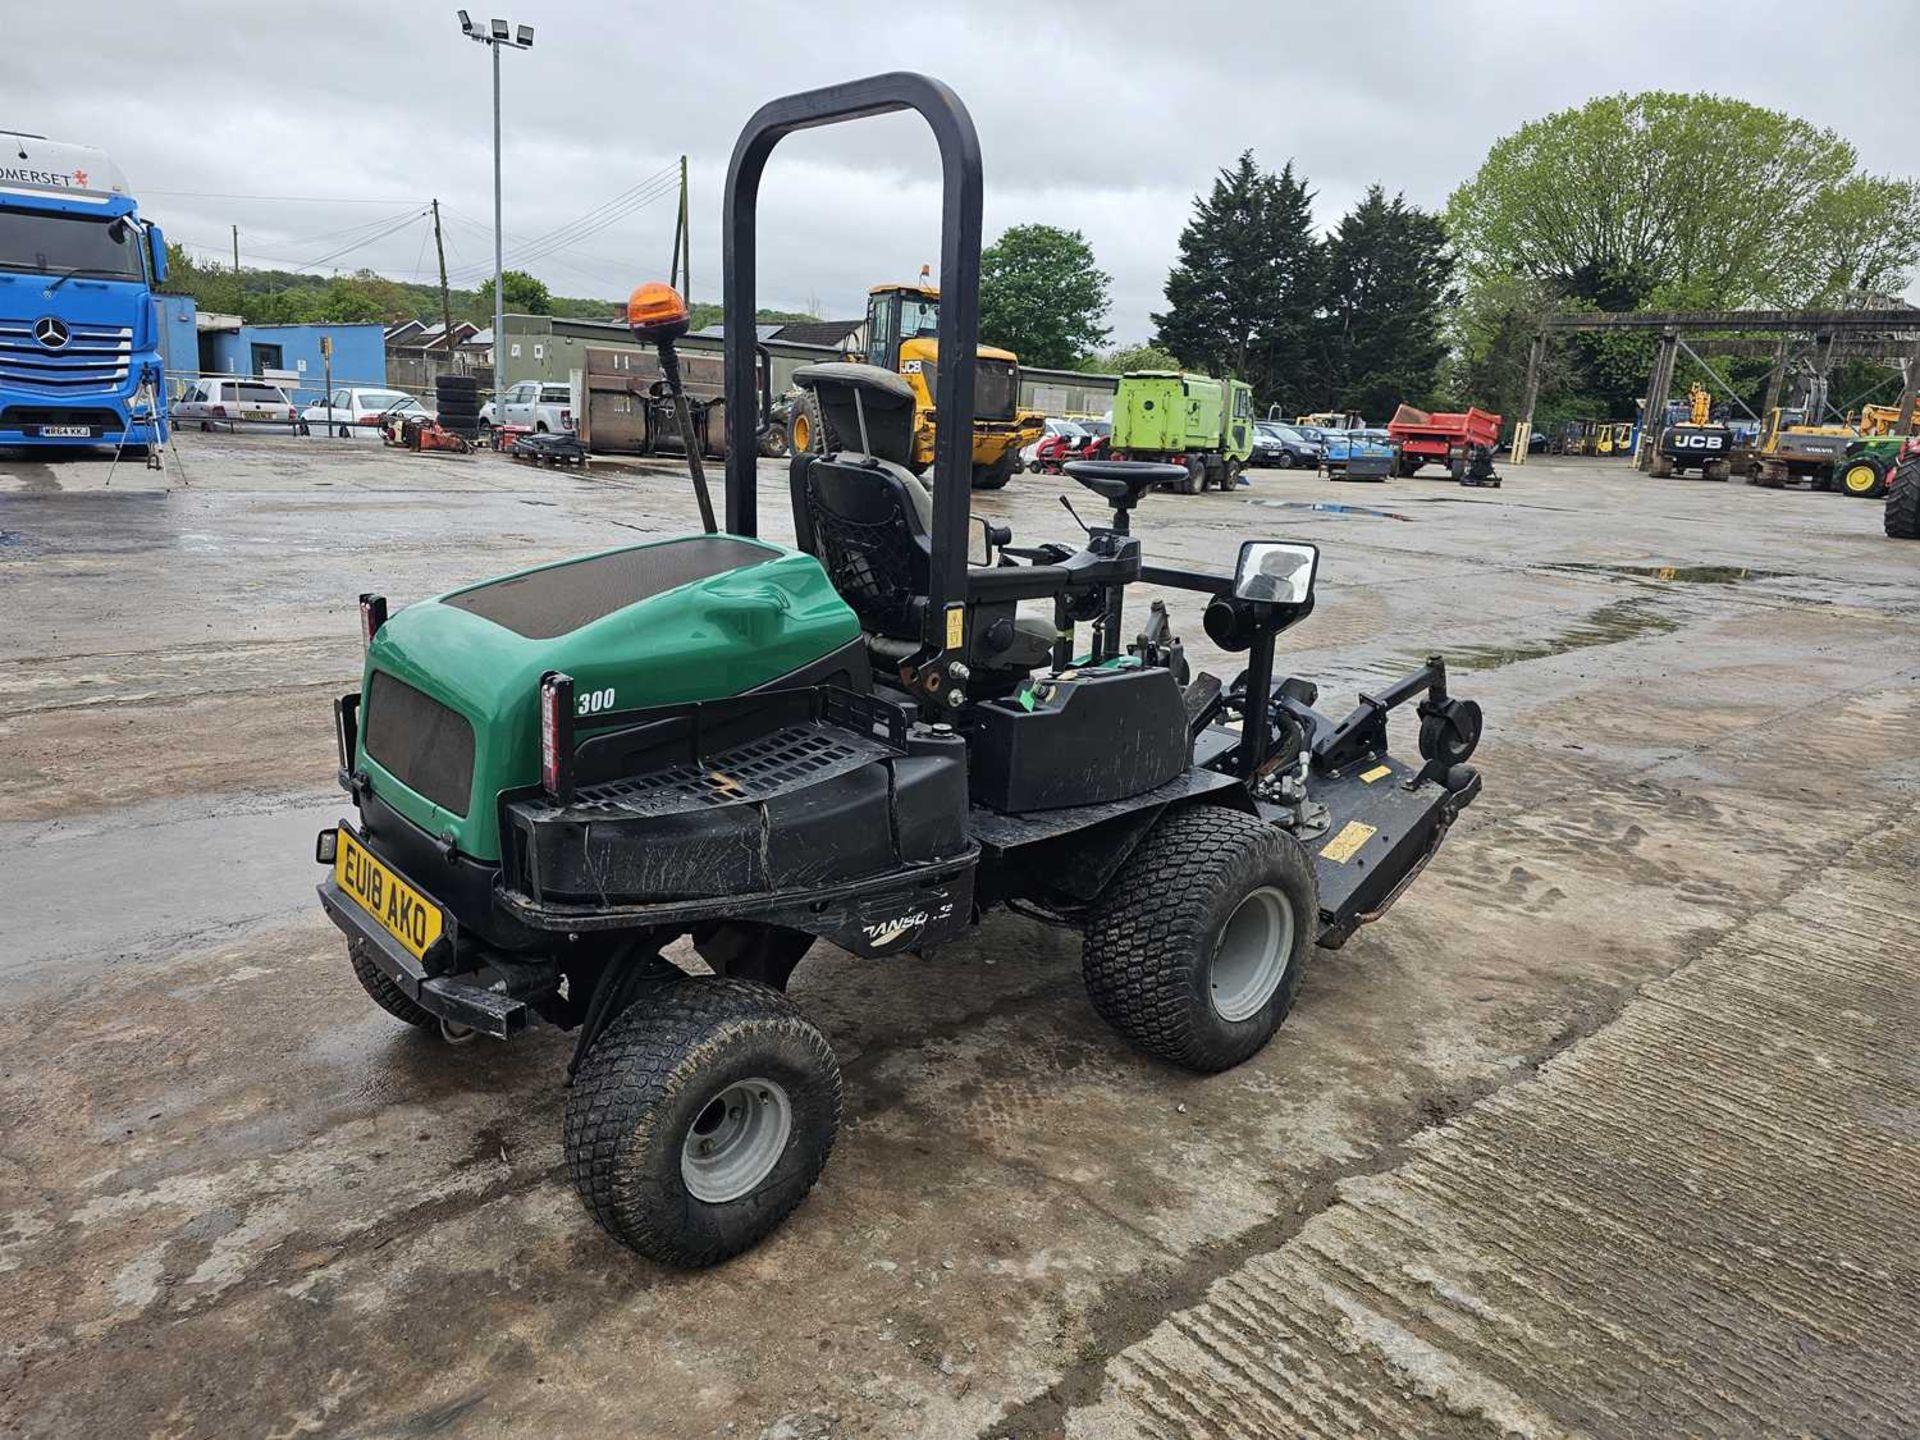 2018 Ransomes HR300 60" Out Front Rotary Mower, (Reg. Docs. Available) - Image 5 of 21